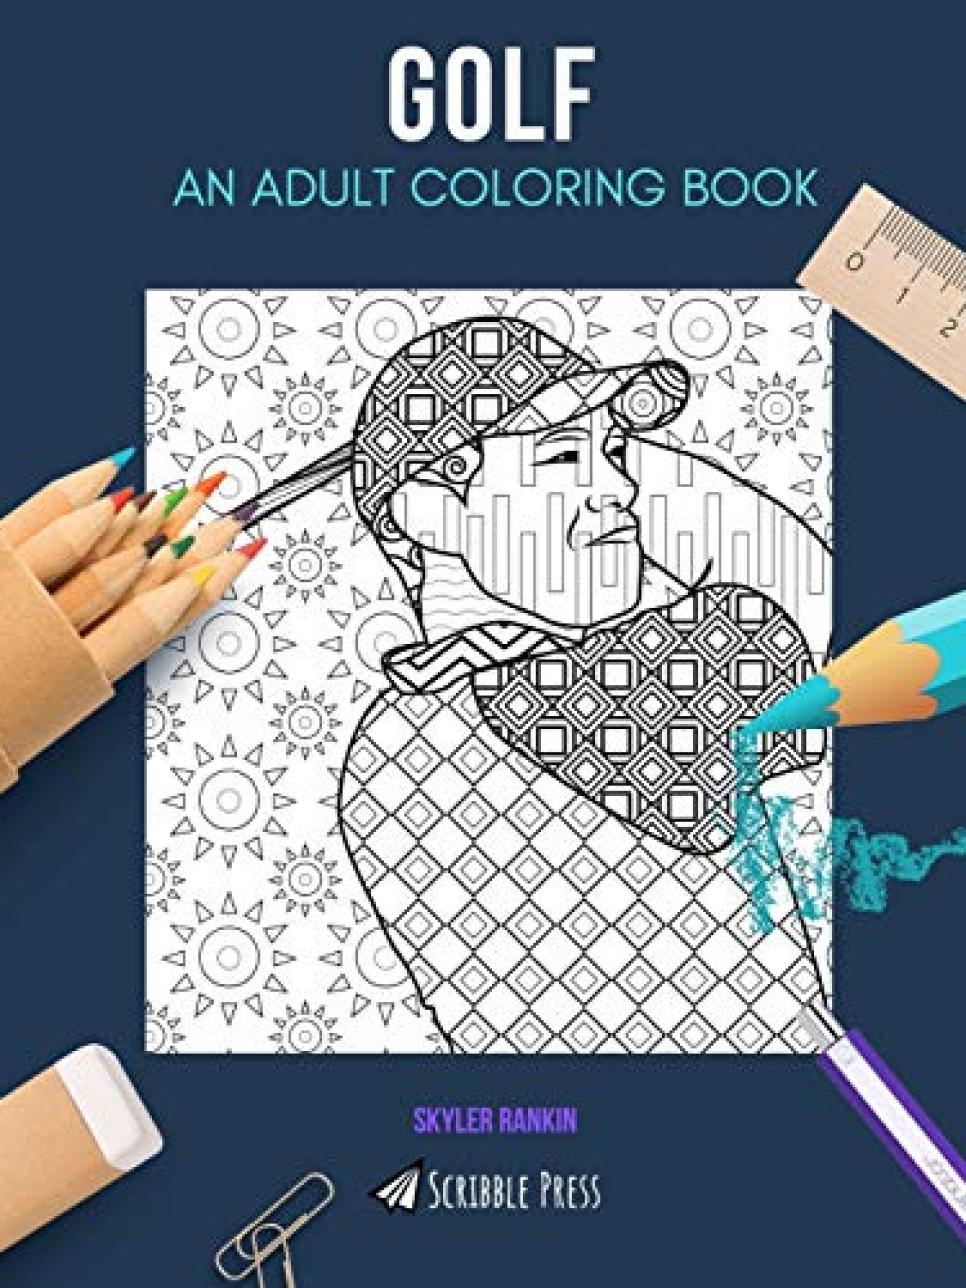 rx-amazongolf-coloring-book-for-adults-by-skyler-rankin.jpeg